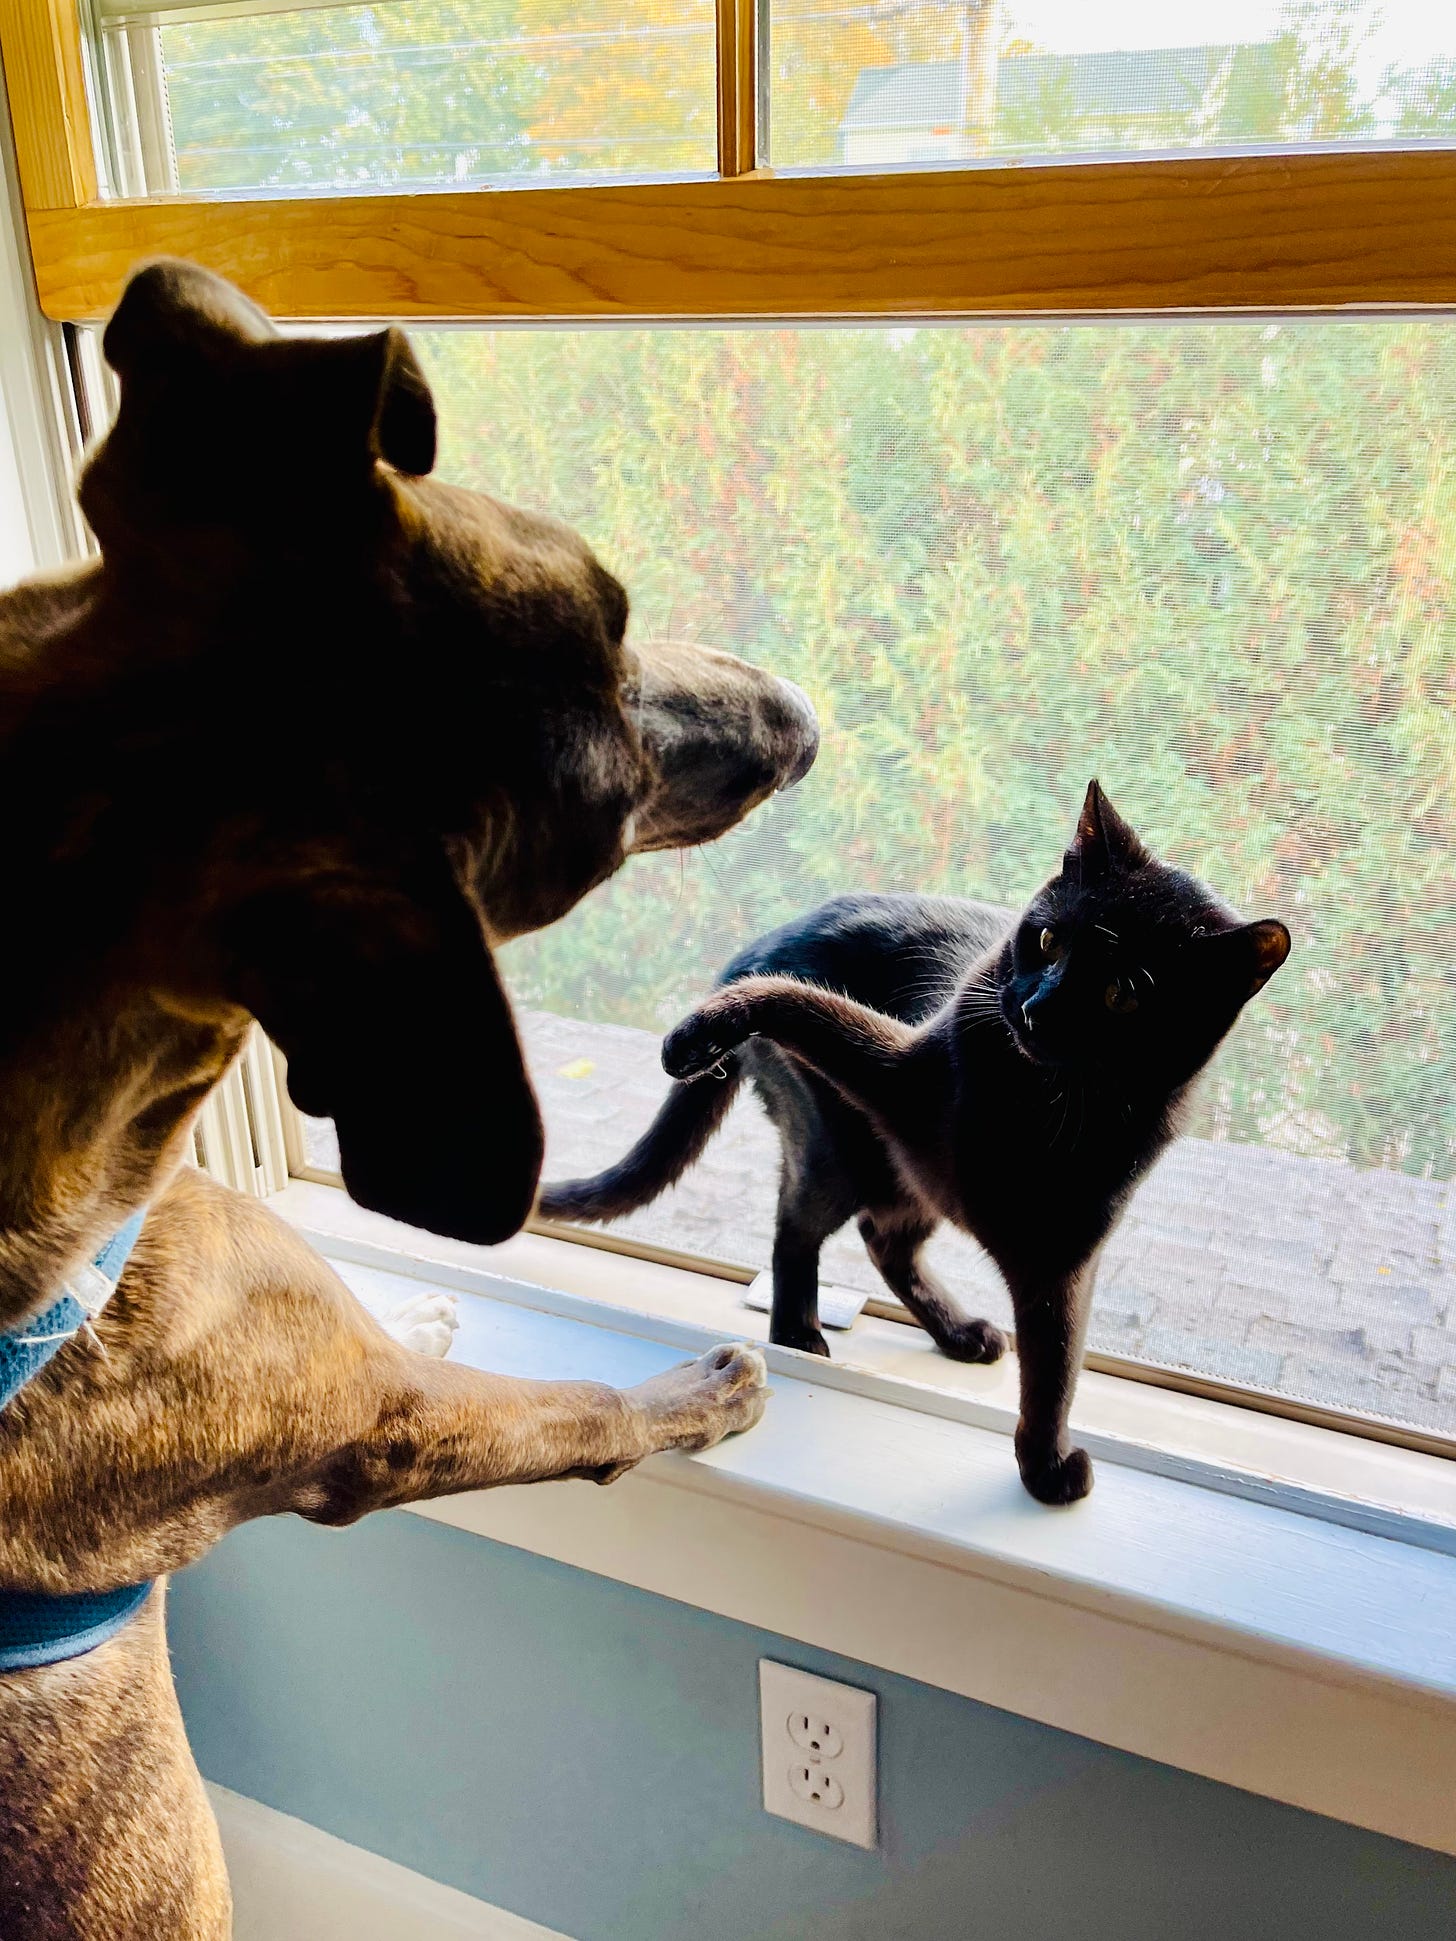 Puppy standing against windowsill, leaning. Kitten on windowsill leaning with arm upraised.